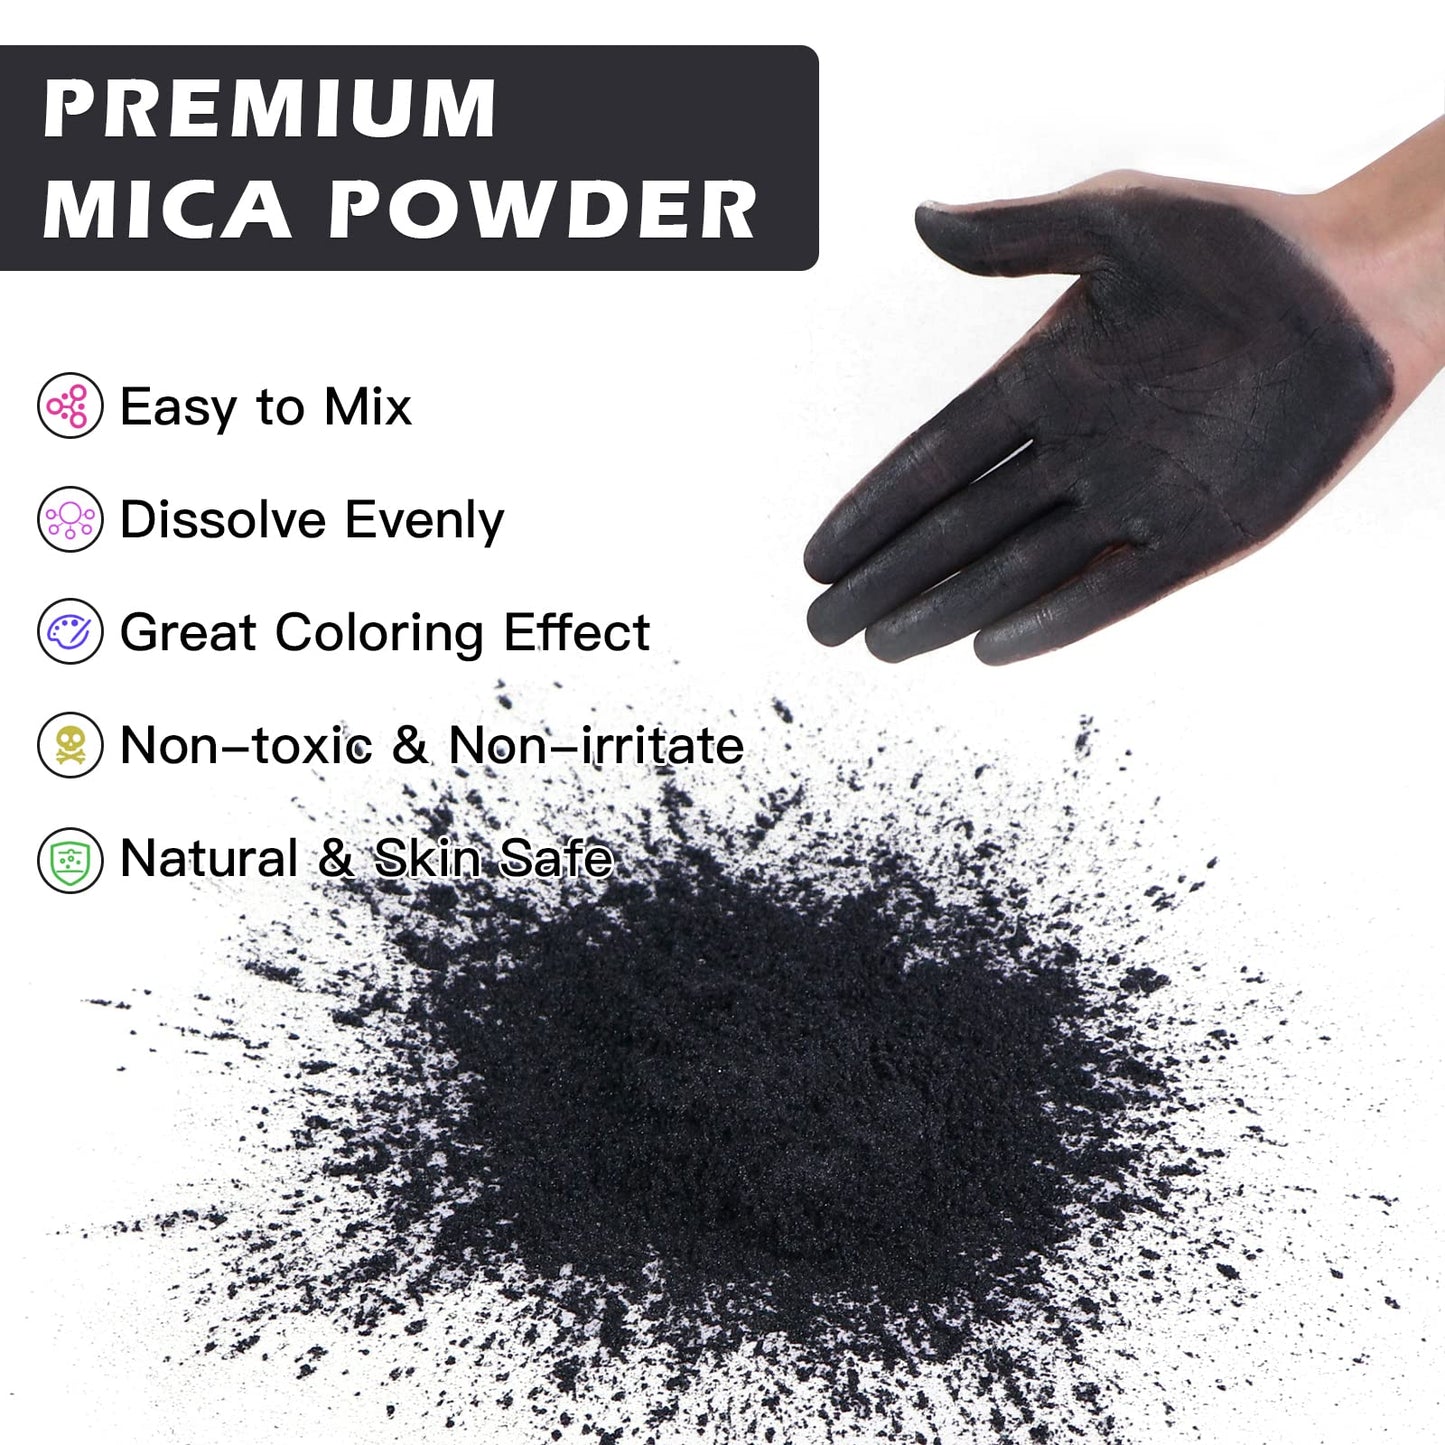 HTVRONT Black Mica Powder for Epoxy Resin - 3.5 oz (100g) Easy to Mix Resin Pigment Powder, Nature Non-Toxic Mica Powder for Soap Making, Candle